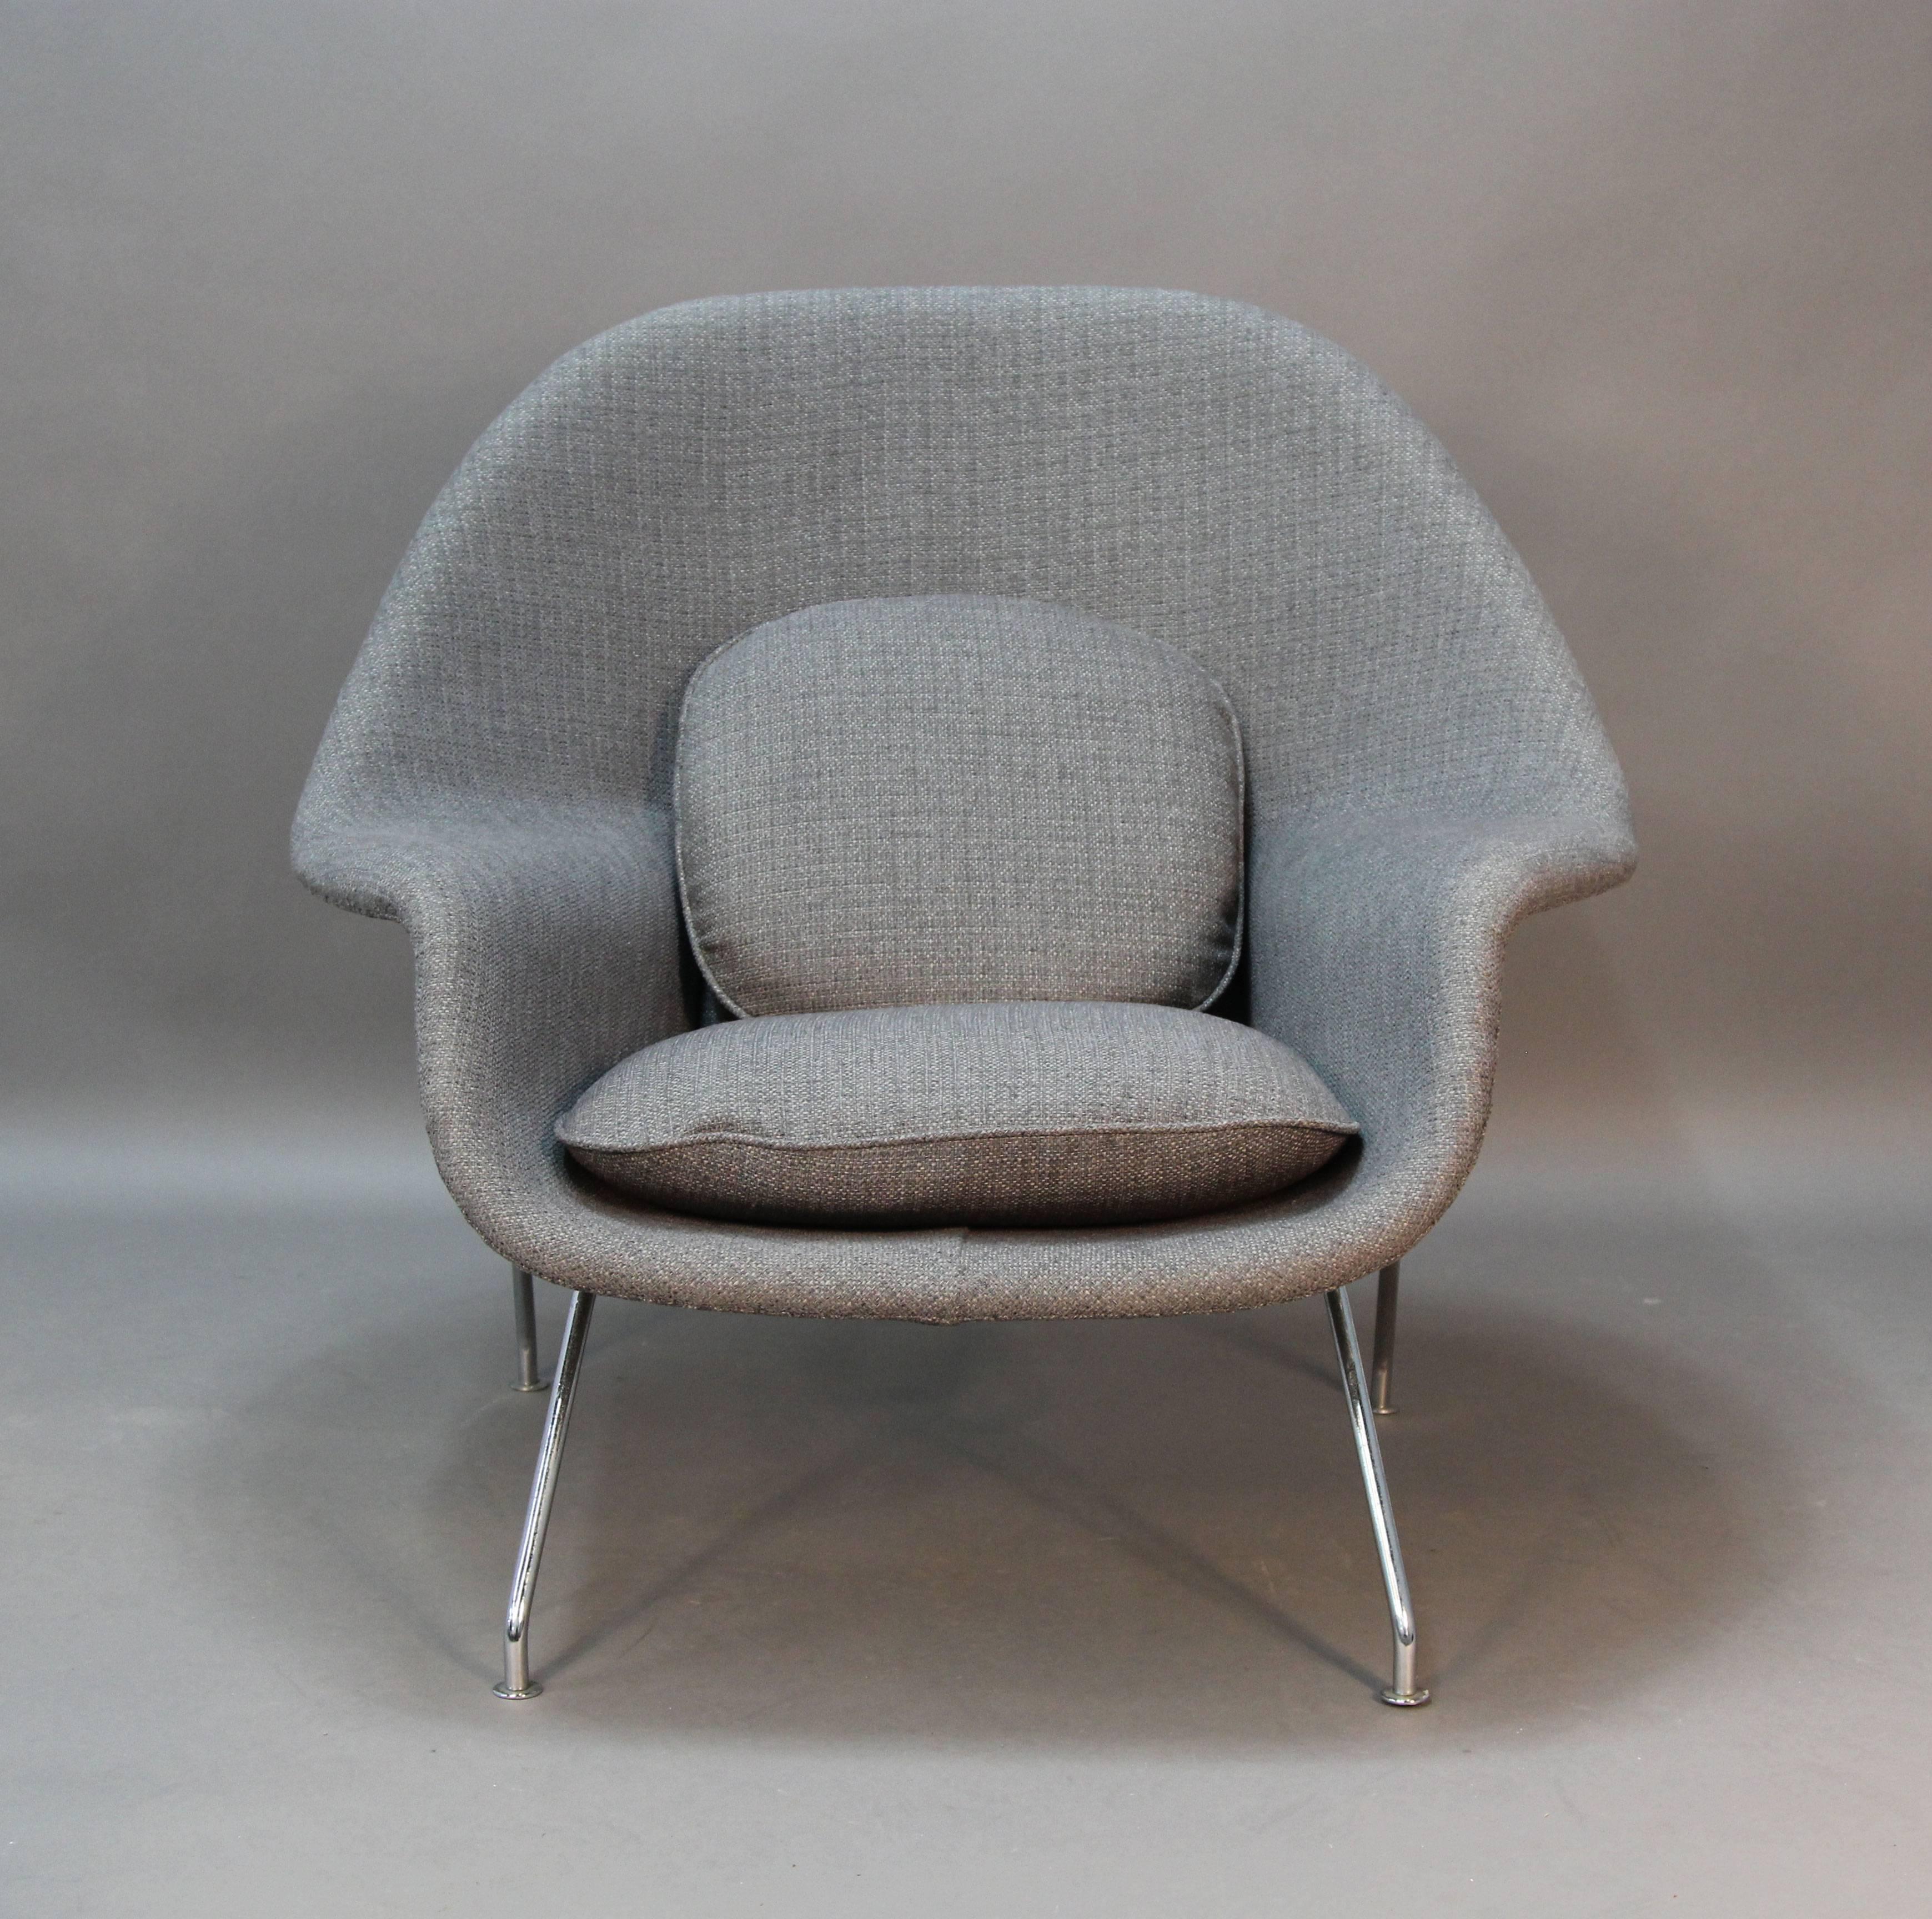 Incredible woven grey newly upholstered womb chair and ottoman. Iconic piece for any space, and extremely comfortable hence the name. Chrome legs and all new foam and cushions.